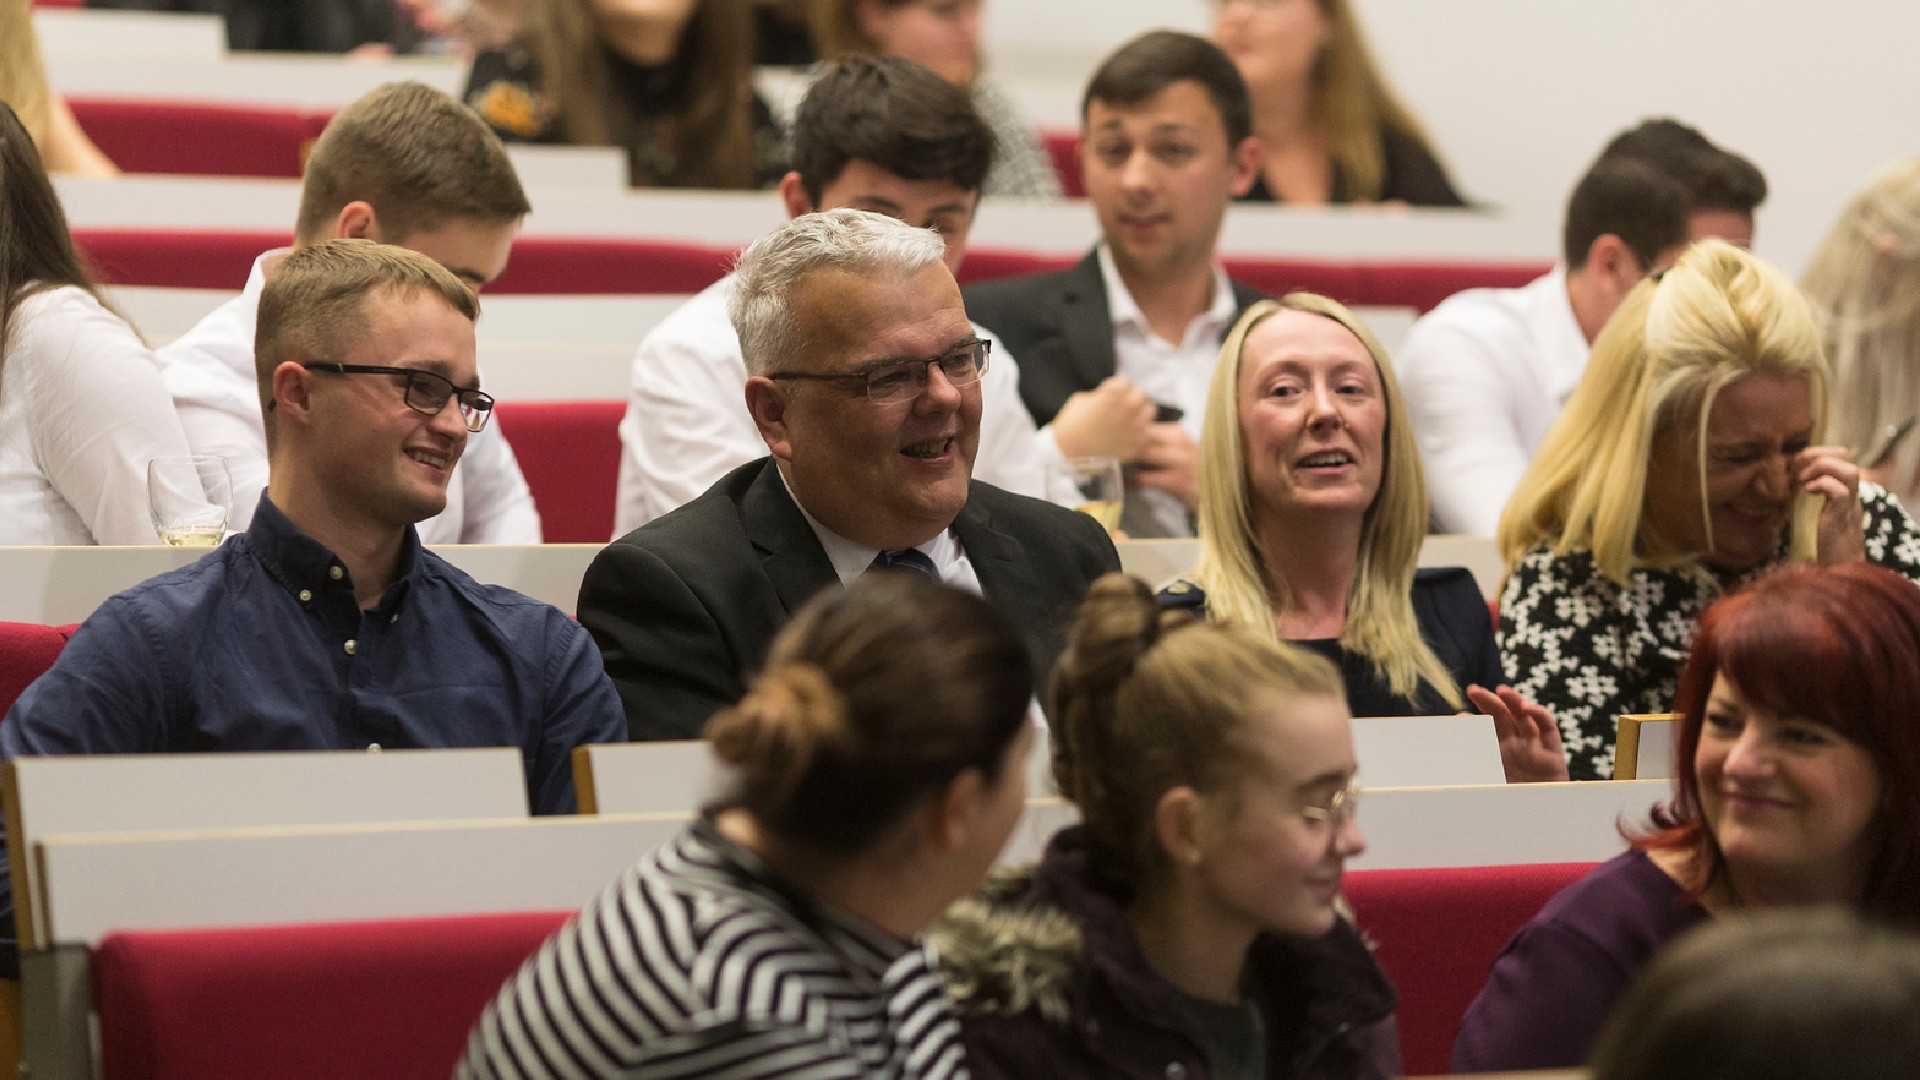 A group of students laugh and smile while seated in row of a lecture theatre